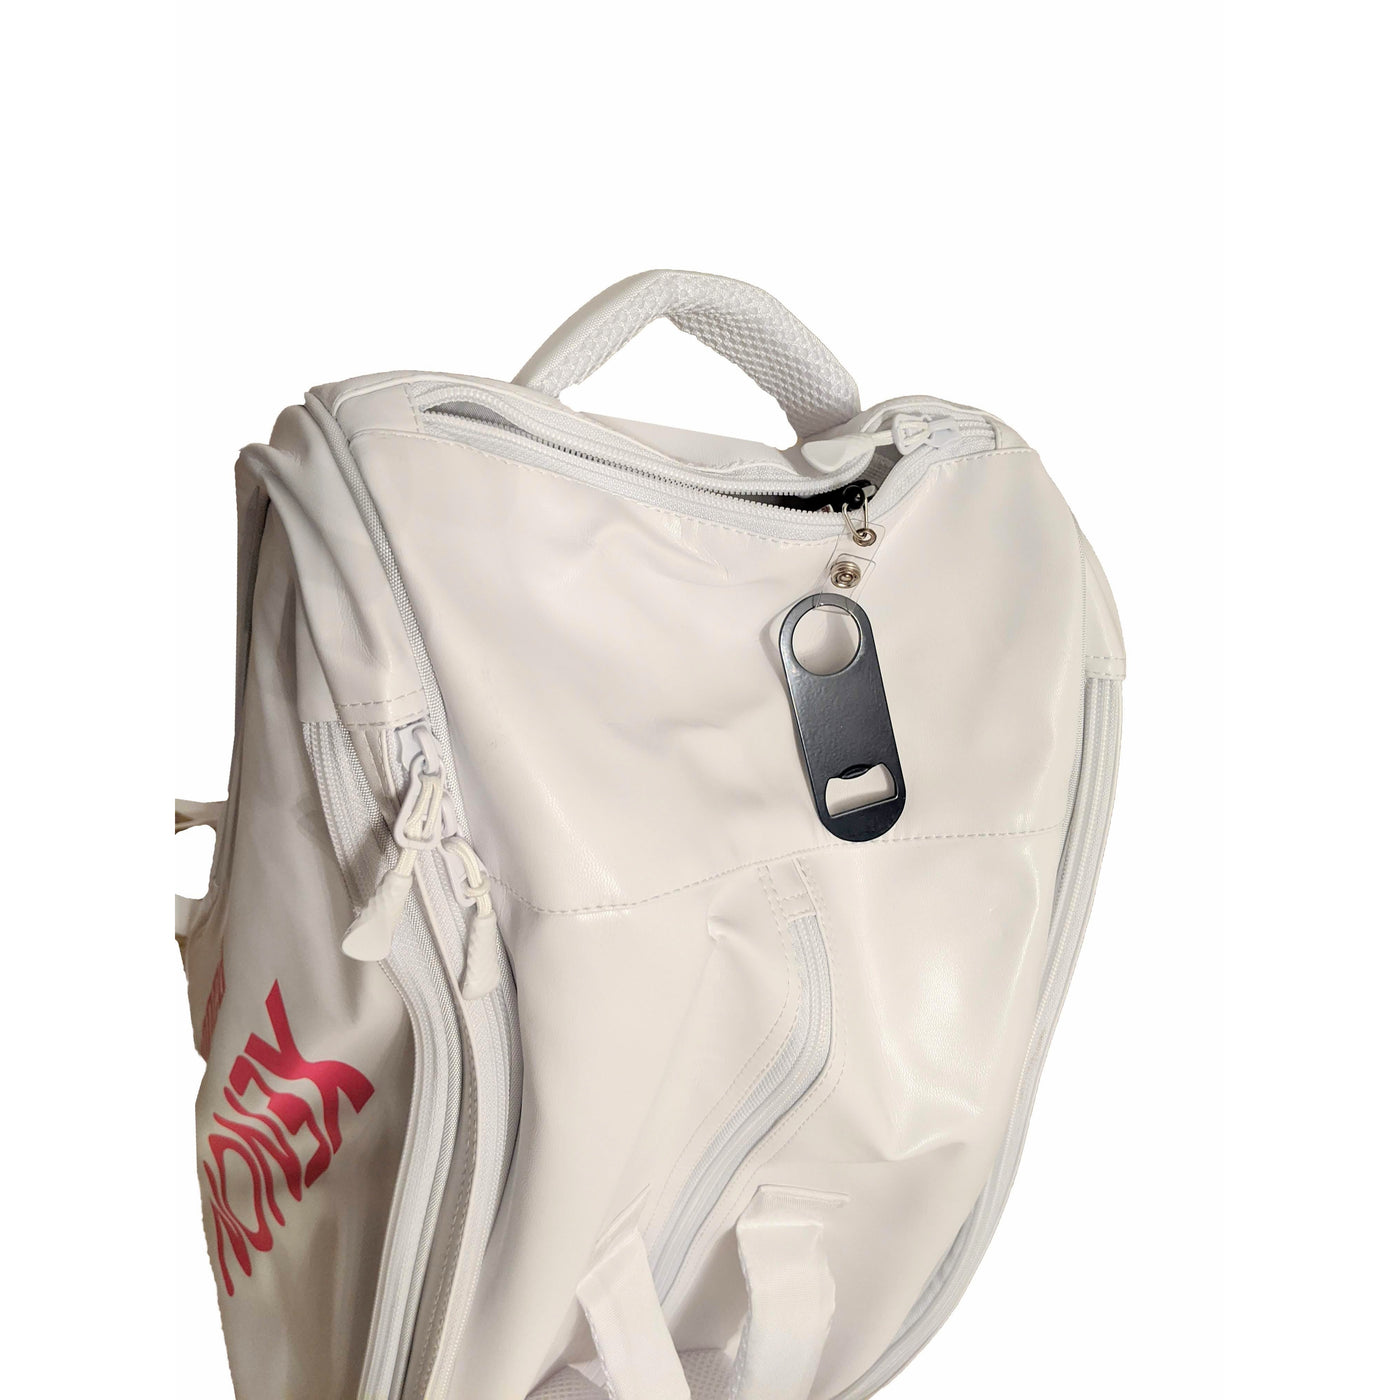 Xenon Paddle Tennis carry bag white large easy carry handle